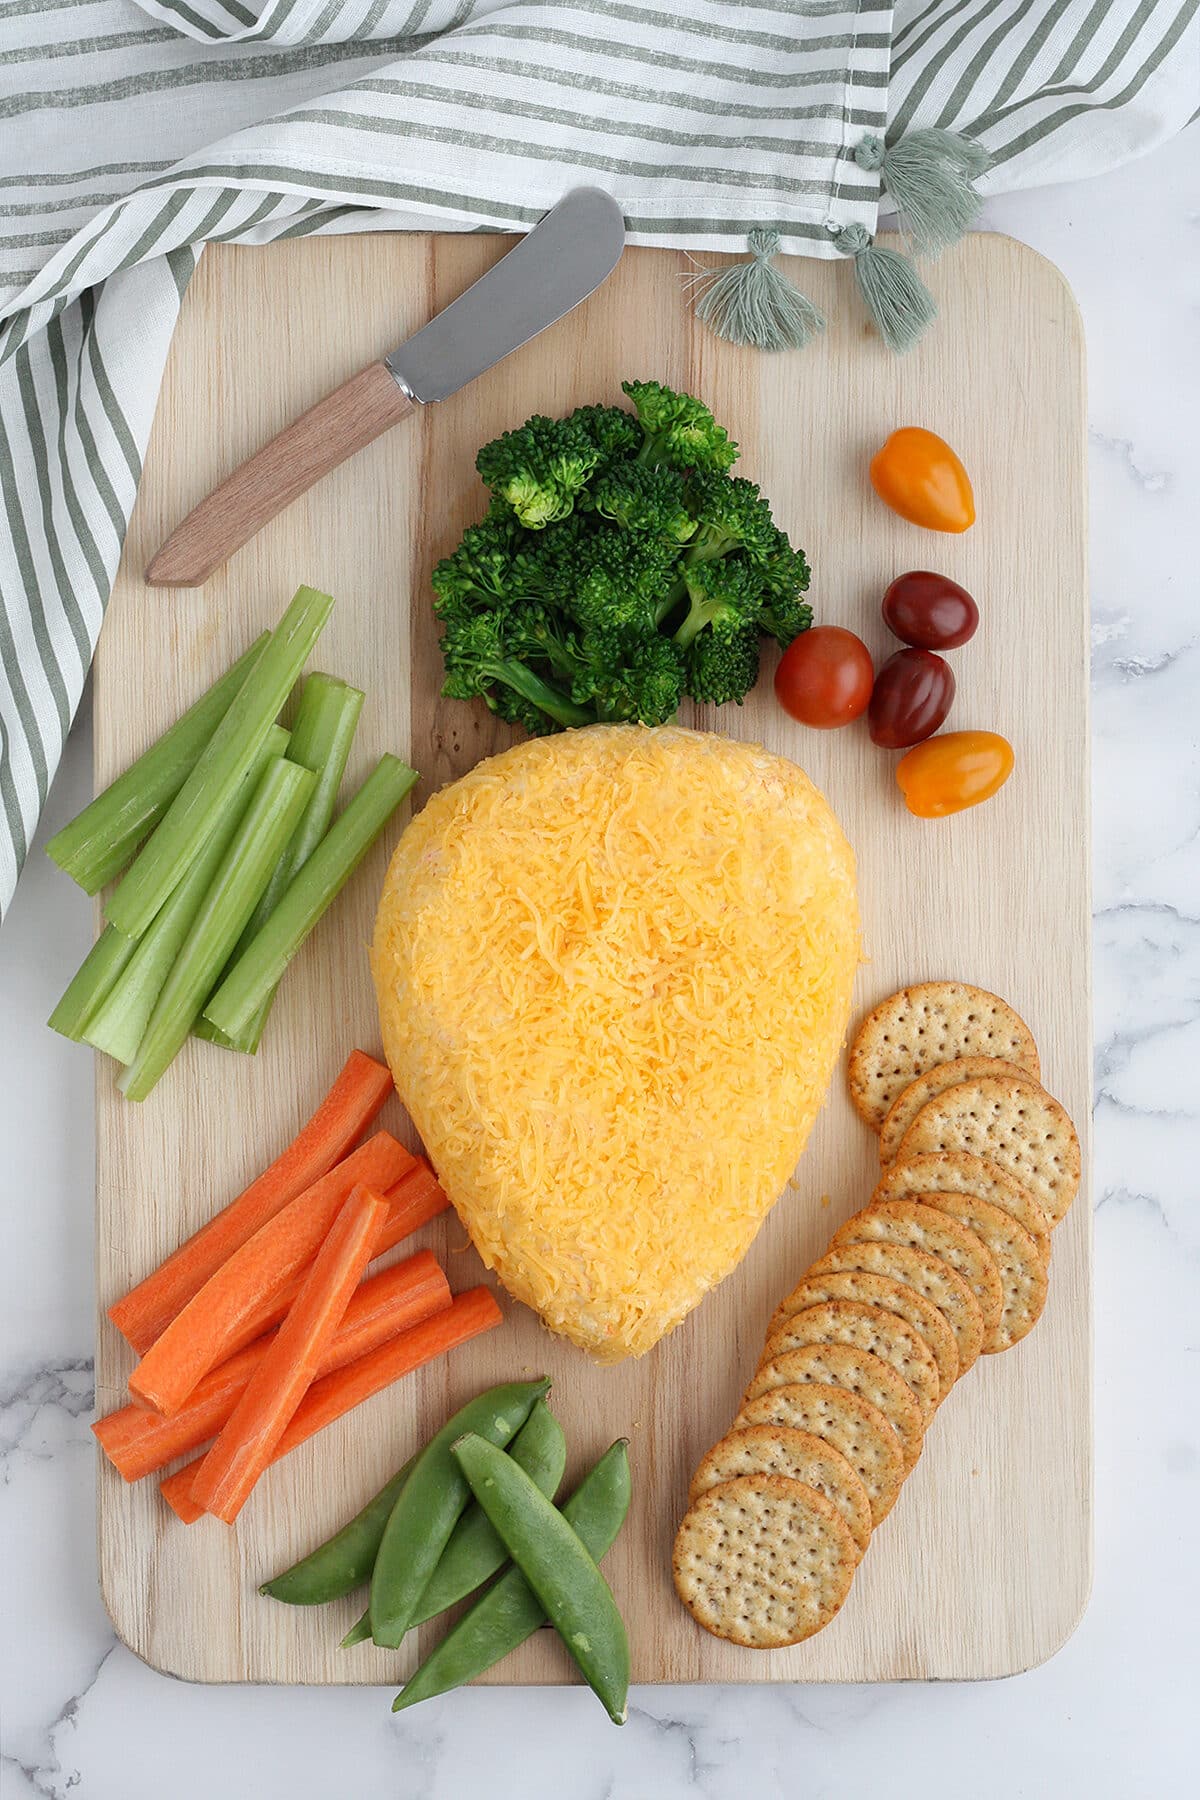 a cheeseball in the shape of a carrot with crackers and vegetables